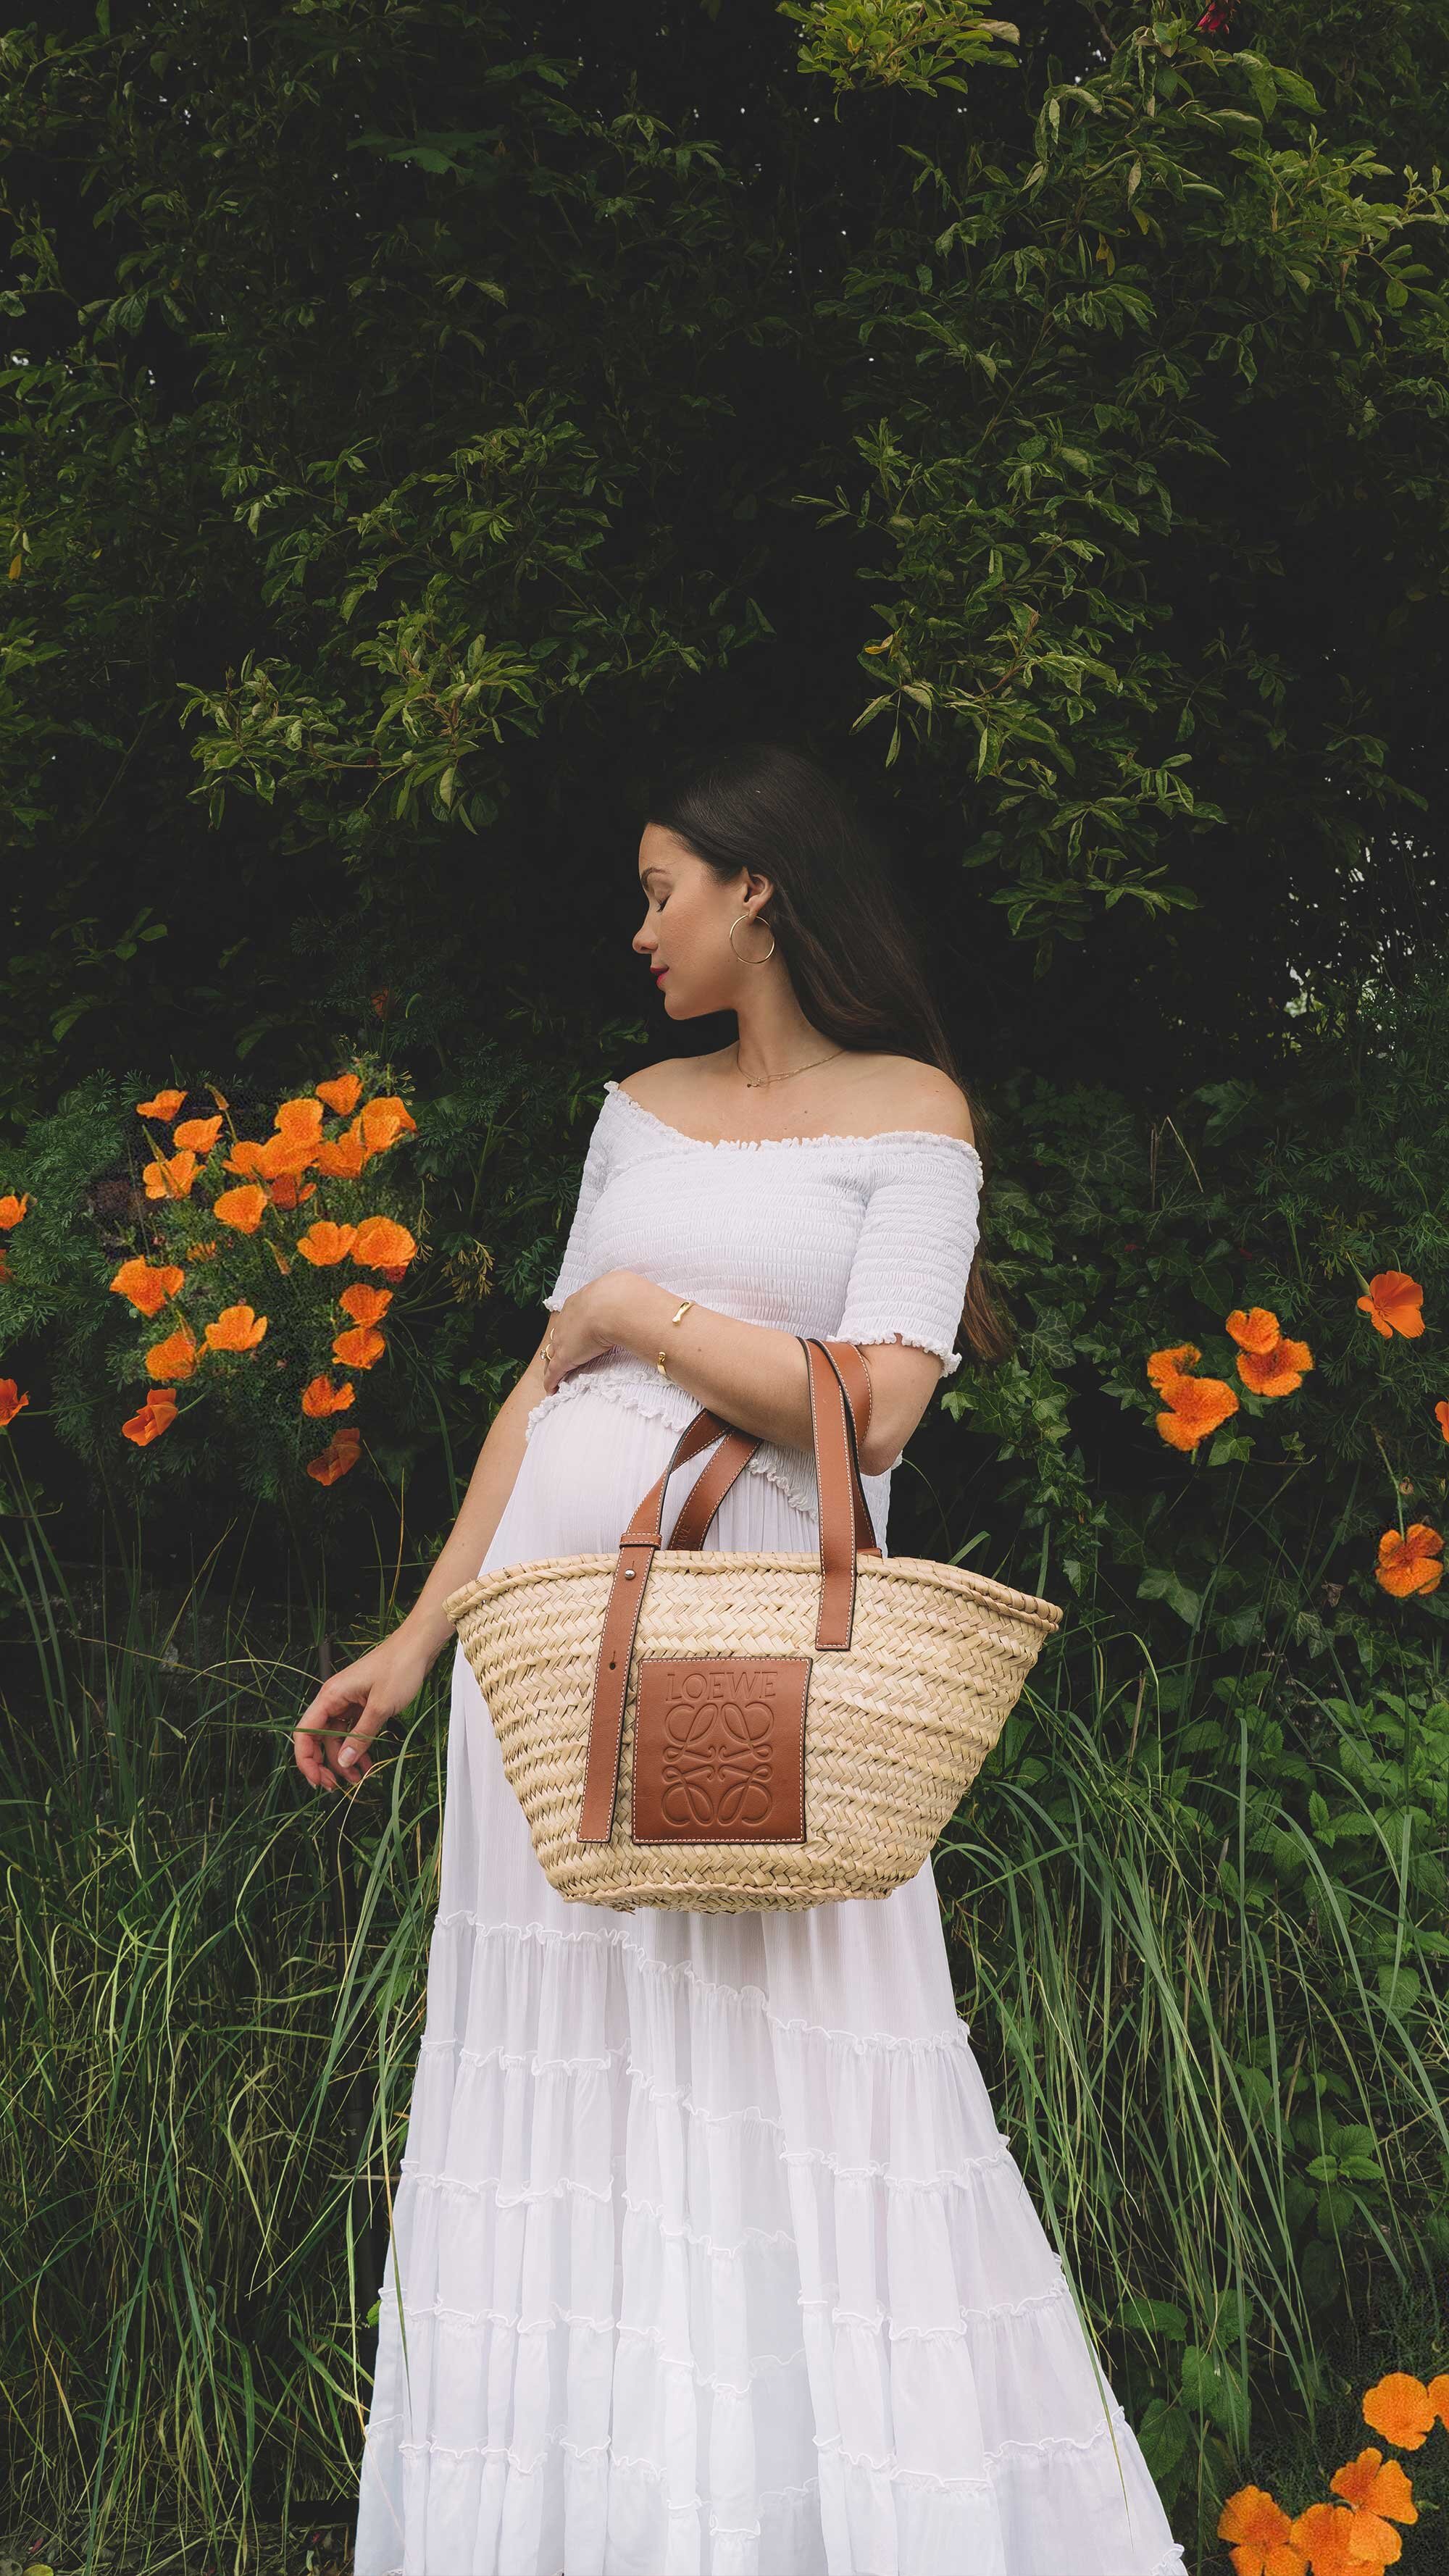 Cute cottage style summer dress. Sarah Butler of @sarahchristine wearing Poupette St Barth Soledad Off-shoulder White Midi Dress and Loewe Leather-Trimmed Woven Basket Bag in countryside field of Seattle, Washington -3.jpg